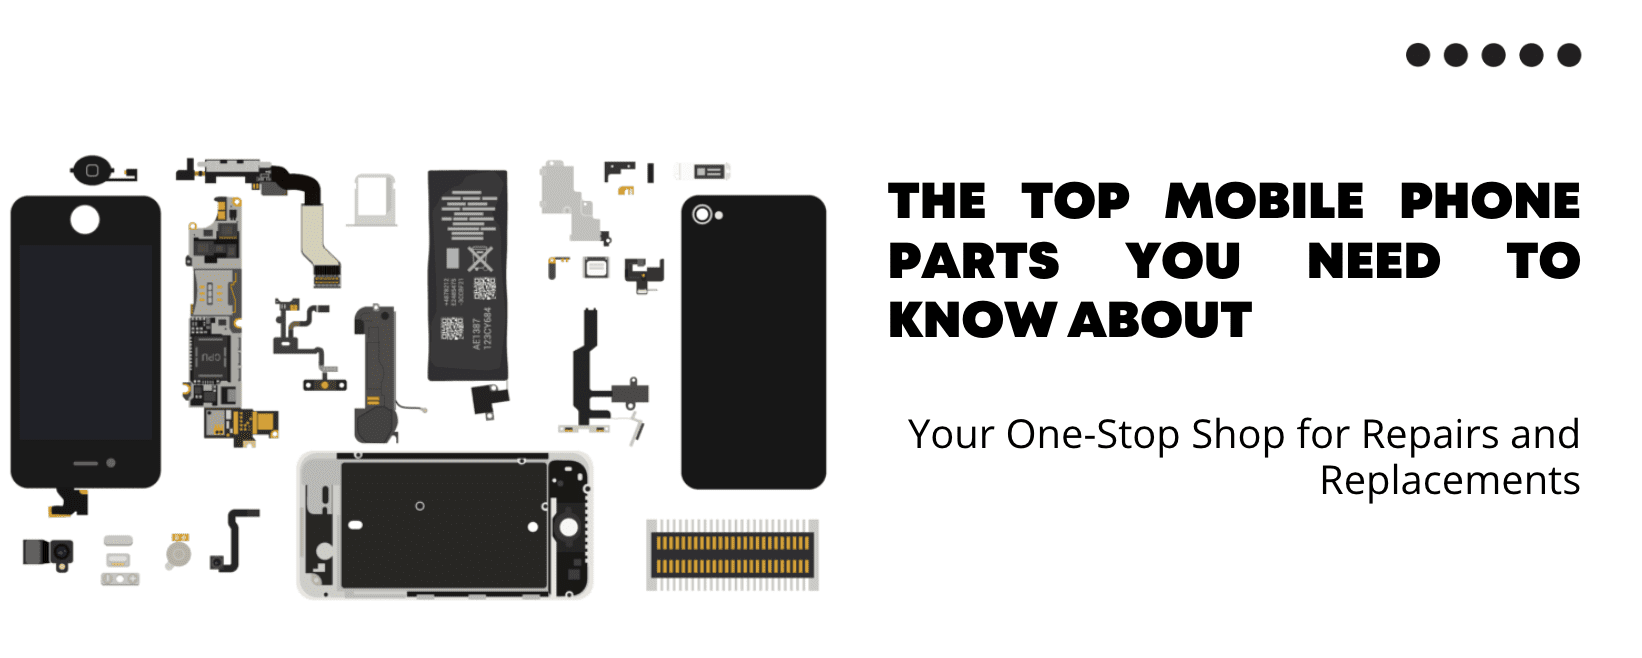 Your One-Stop Shop for Repairs and Replacements